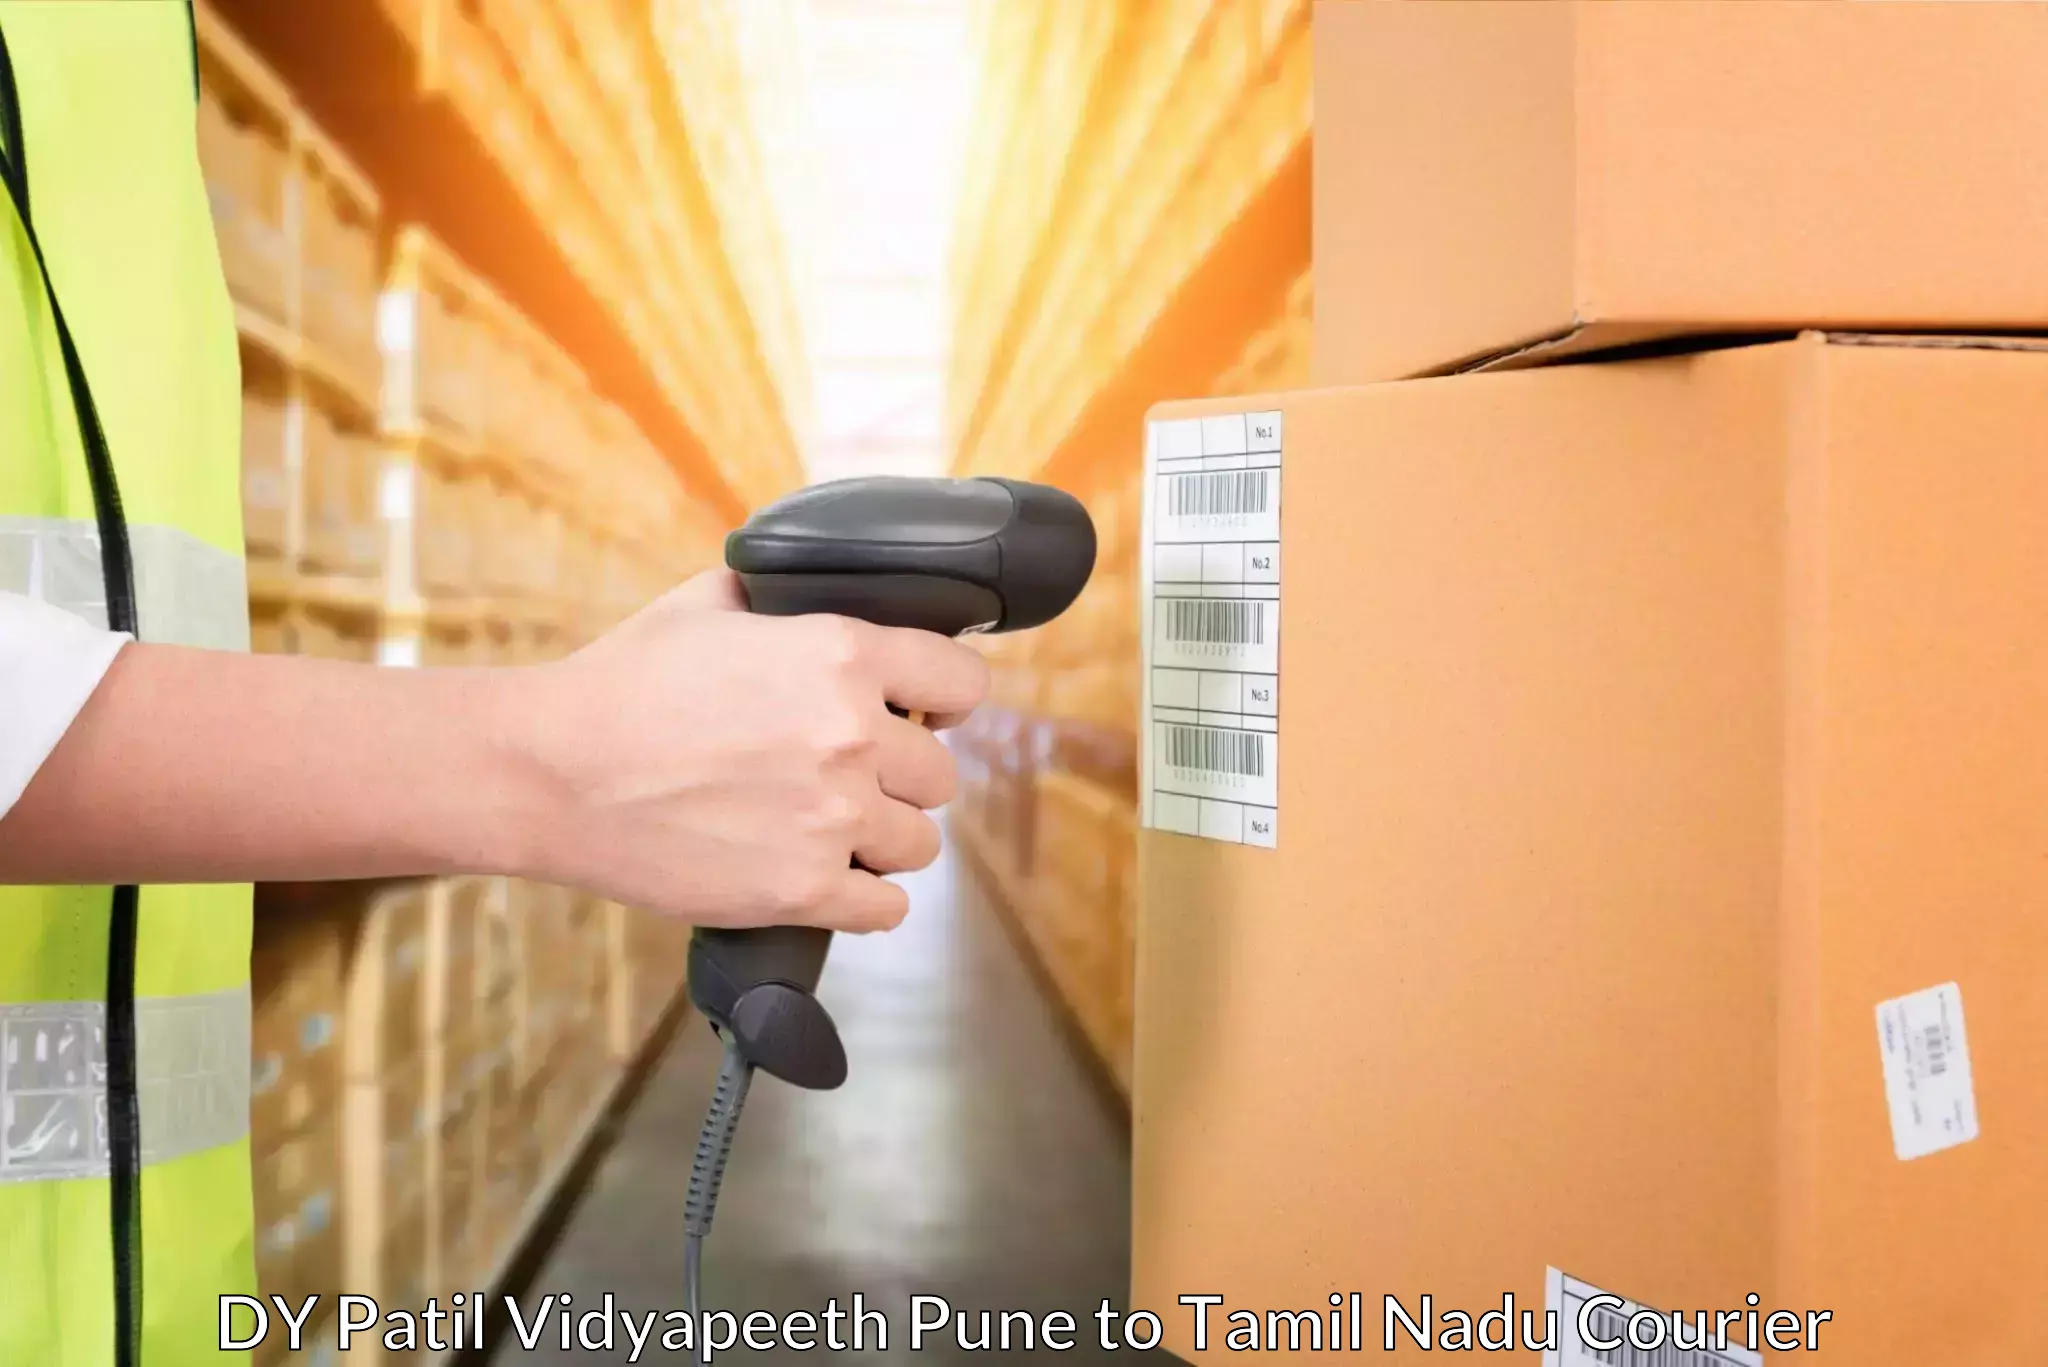 Reliable package handling DY Patil Vidyapeeth Pune to Vriddhachalam